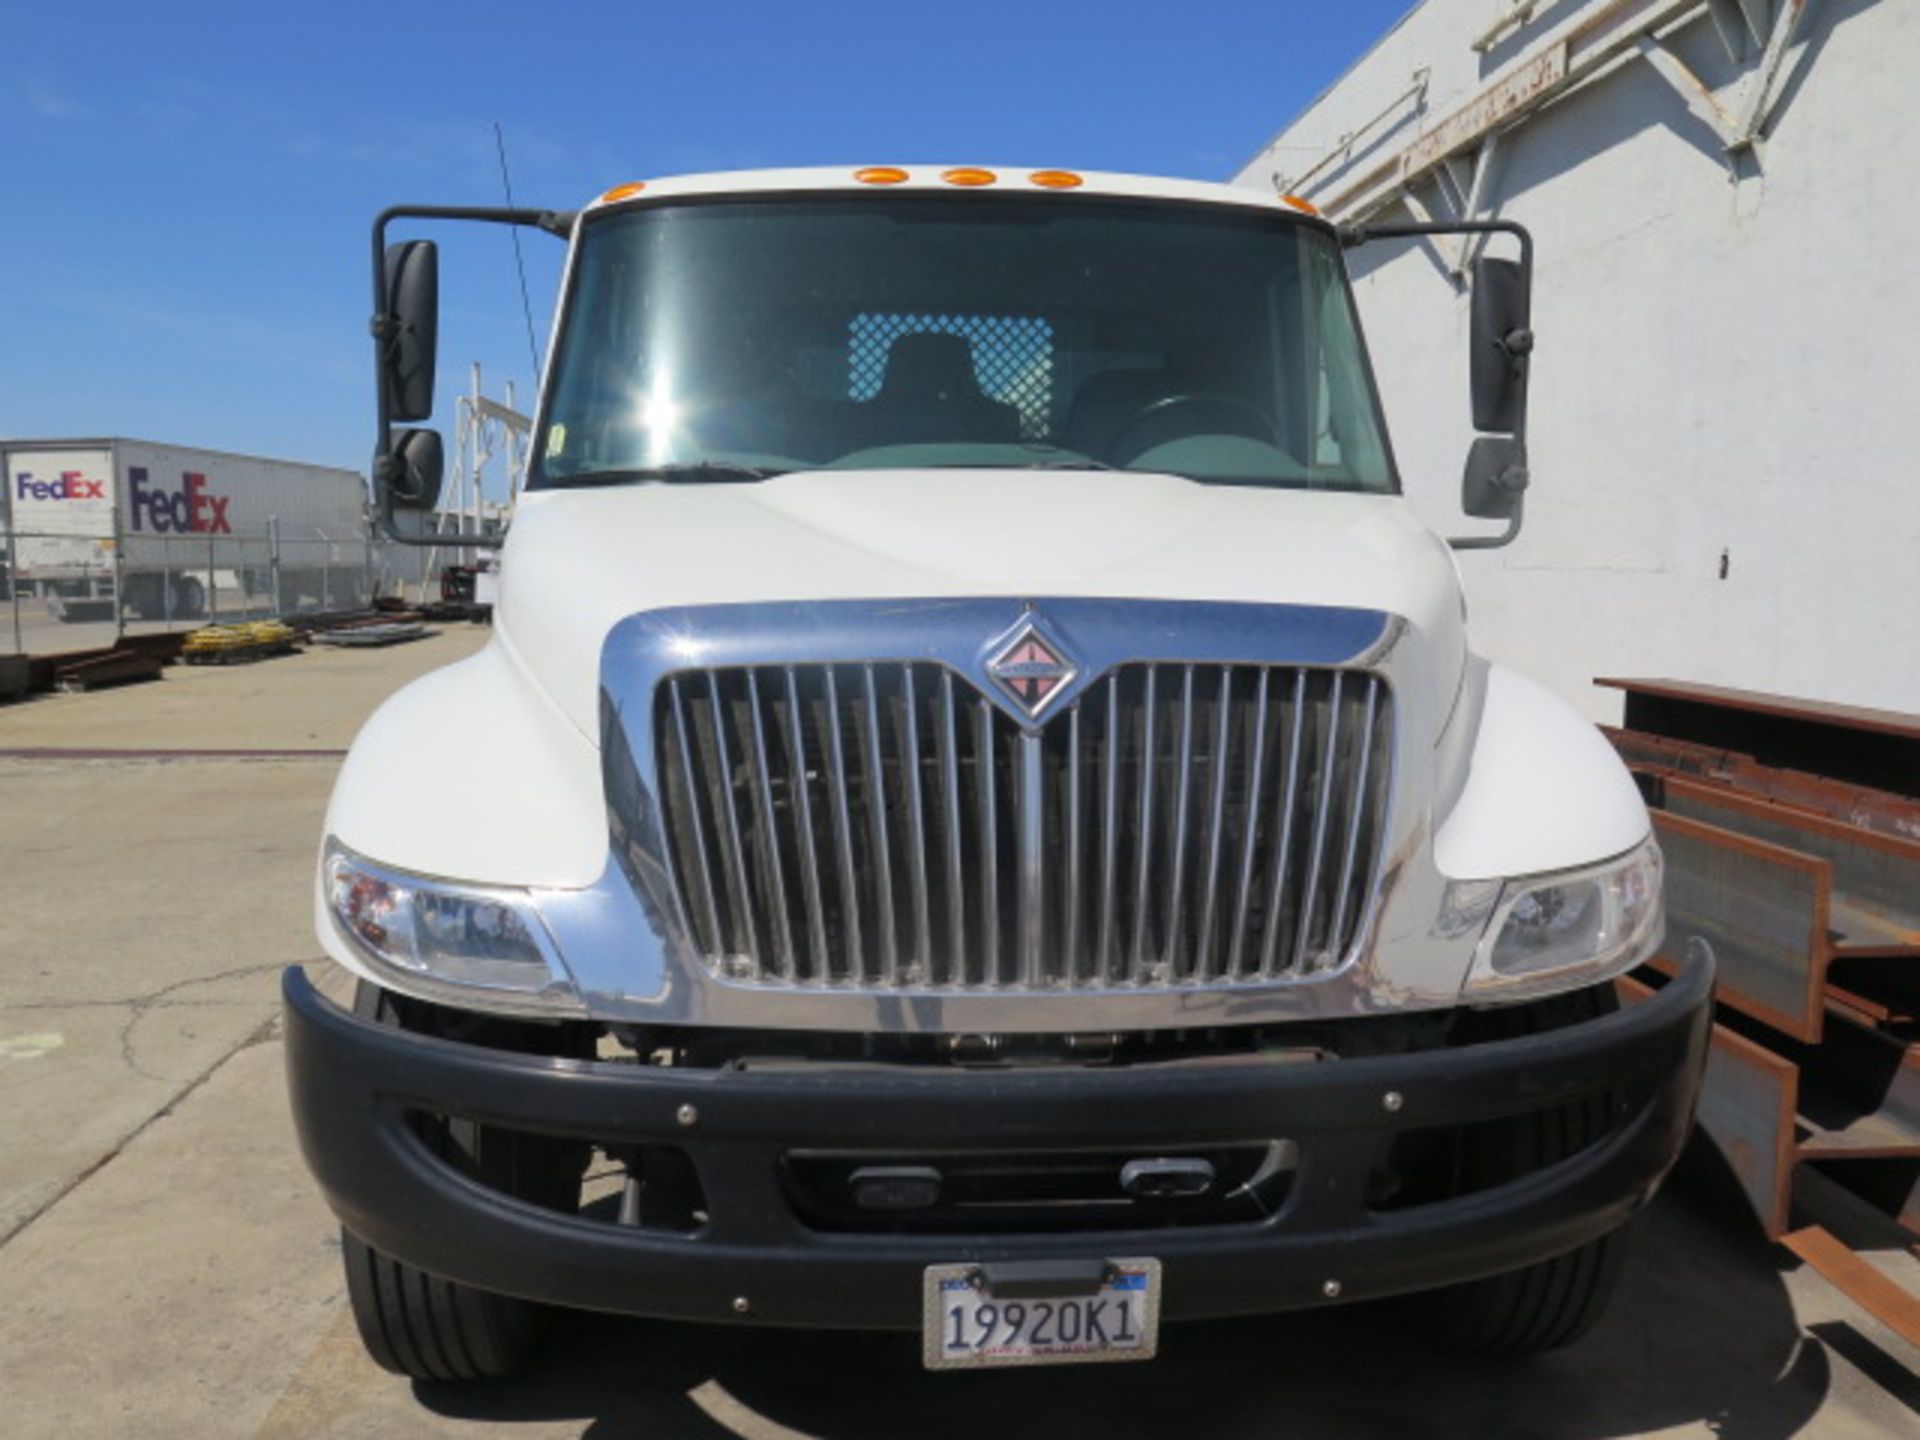 2005 International 4300 DT466 24’ Stake Bed Lisc# 19920K1 w/ Diesel, Auto,NOT FOR CA USE, SOLD AS IS - Image 2 of 34